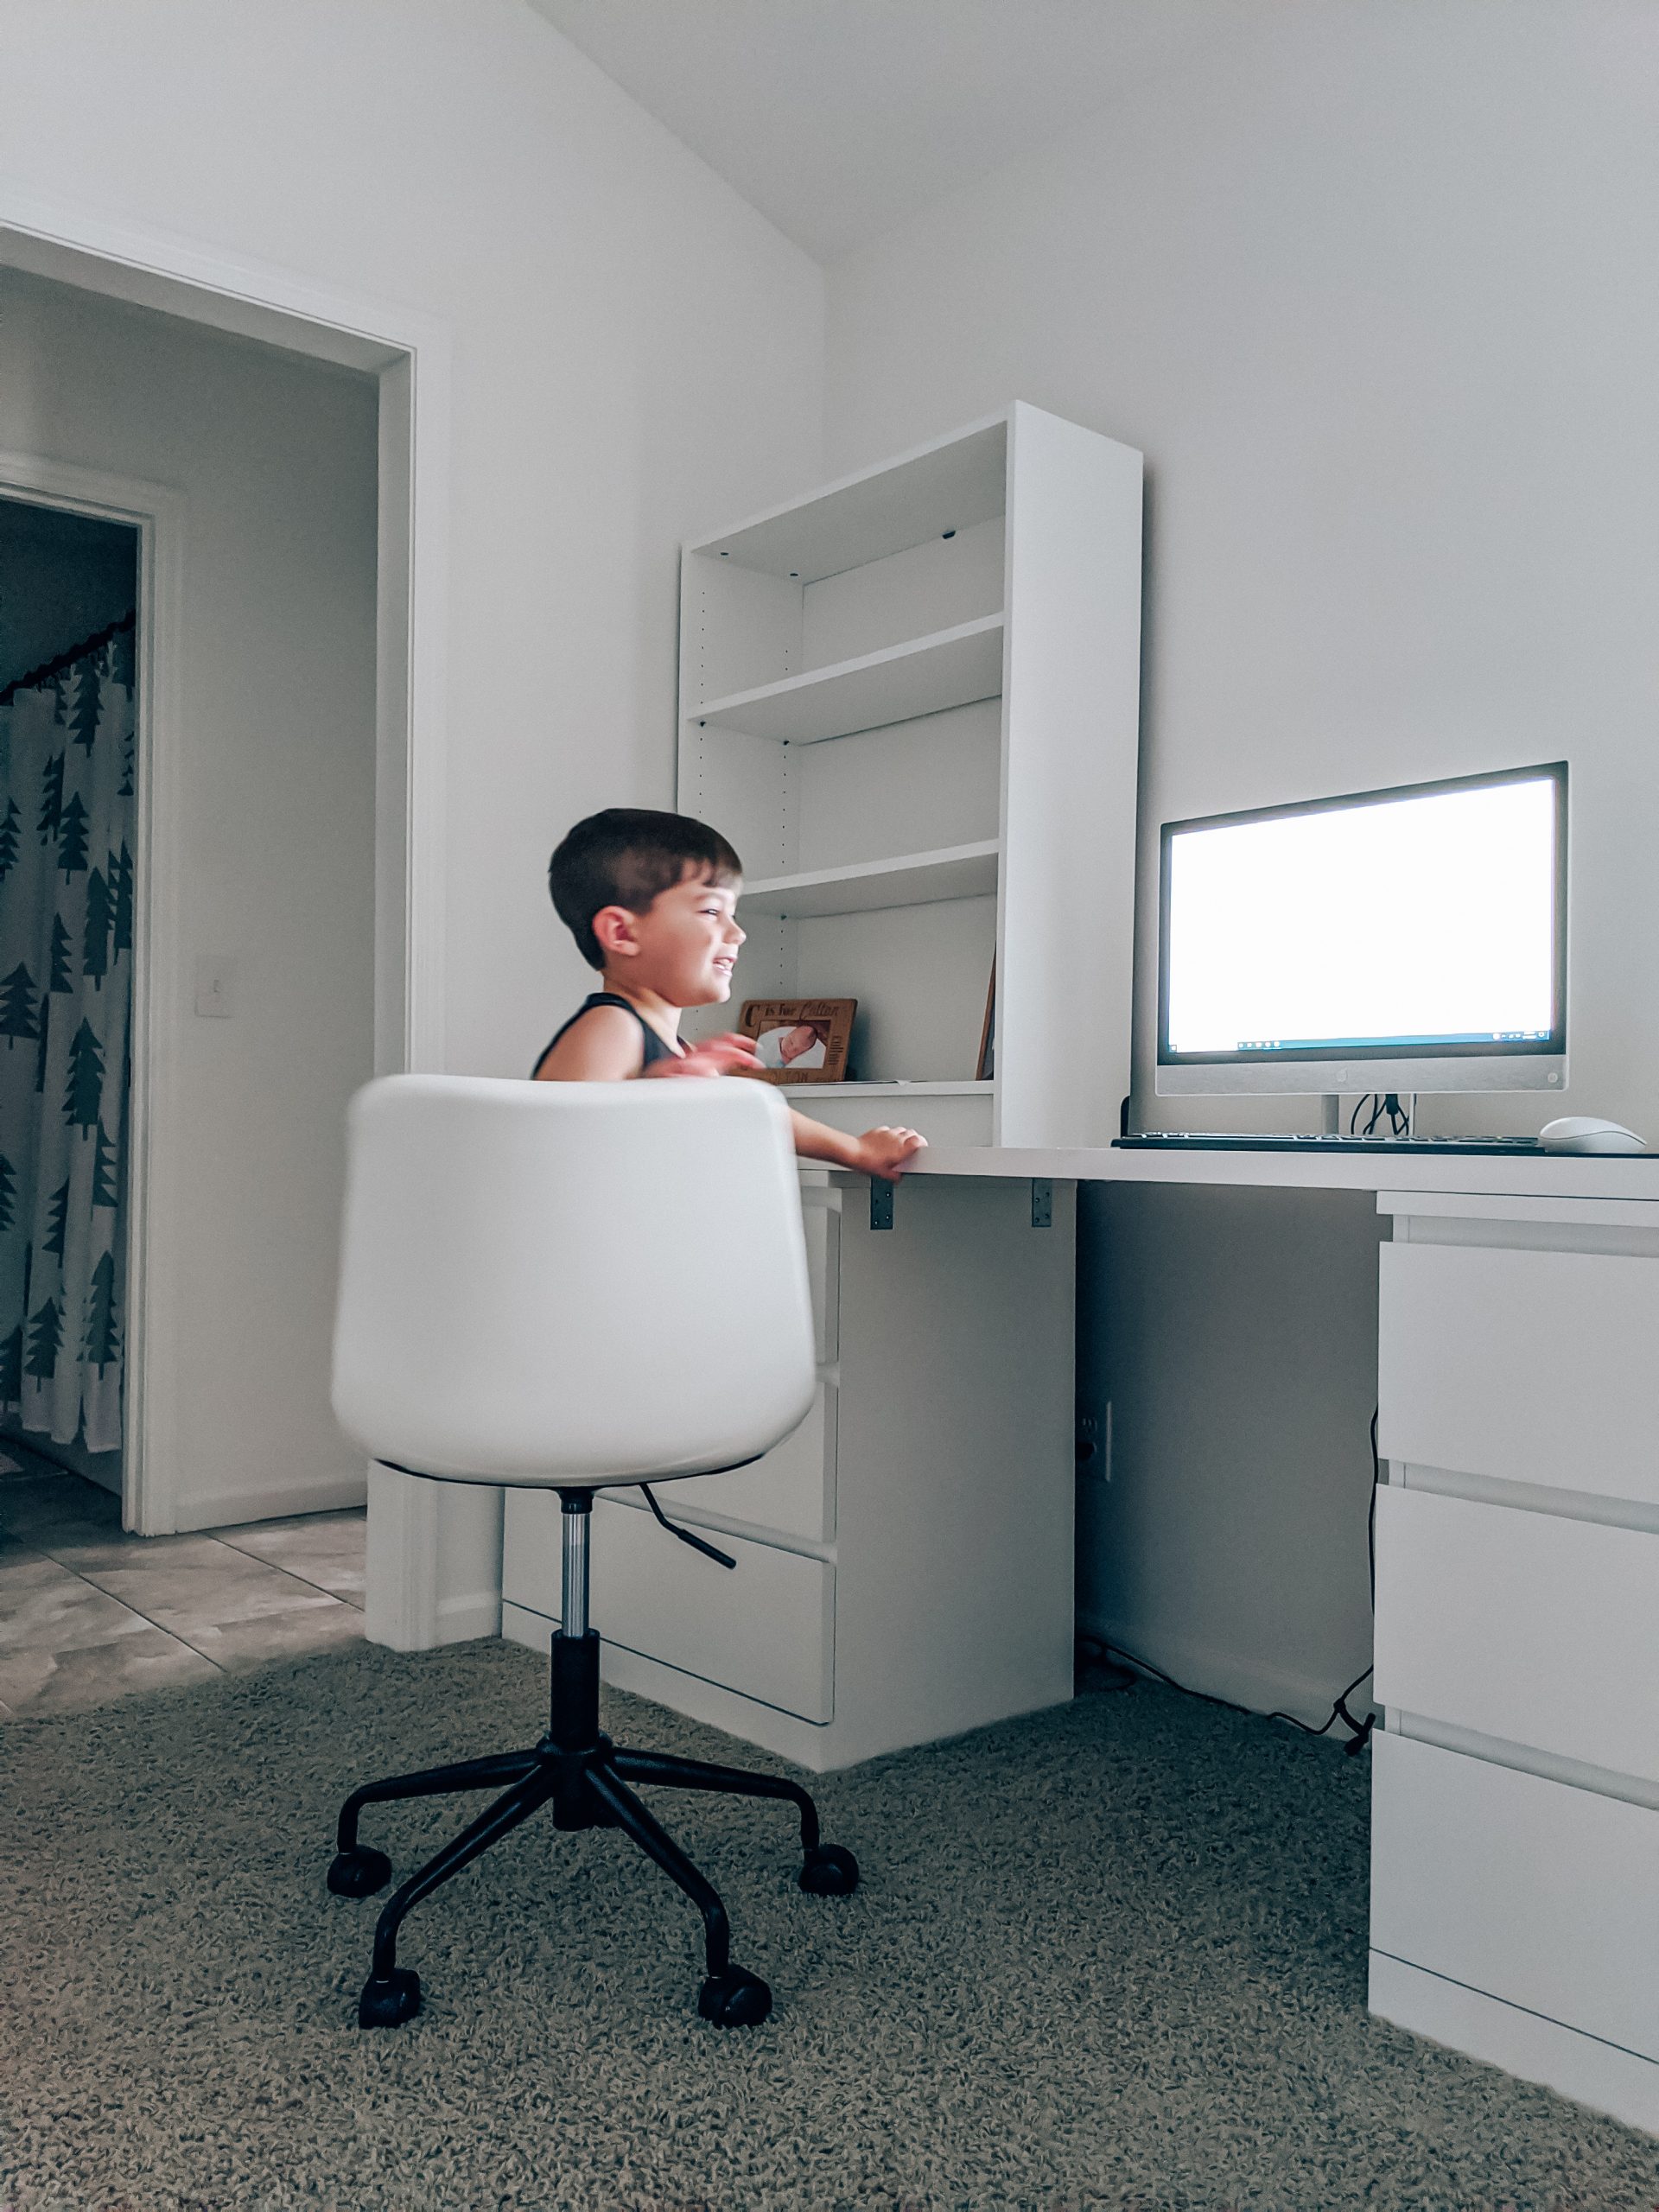 Best Kids Desk Chair - Byron Task Chair Reviews - This kids desk chair is perfect for your virtual learning setup! If you're looking for the best kids desk chair, read this detailed Byron Task Chair review! (sponsored by #Wayfair - #virtuallearning #homeschool #homeoffice )